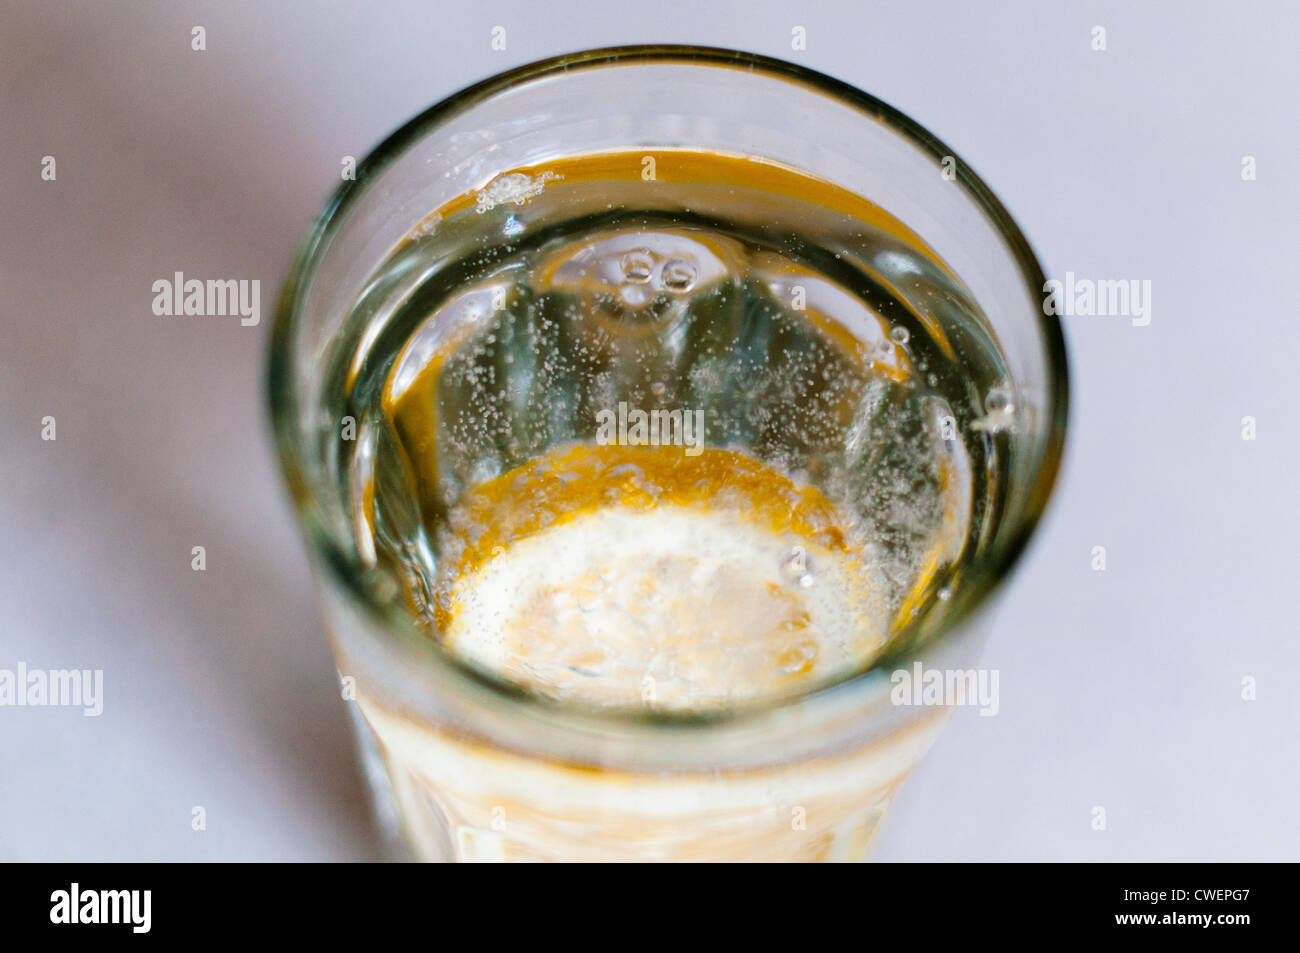 slice of lemon drops in a glass of mineral water Stock Photo